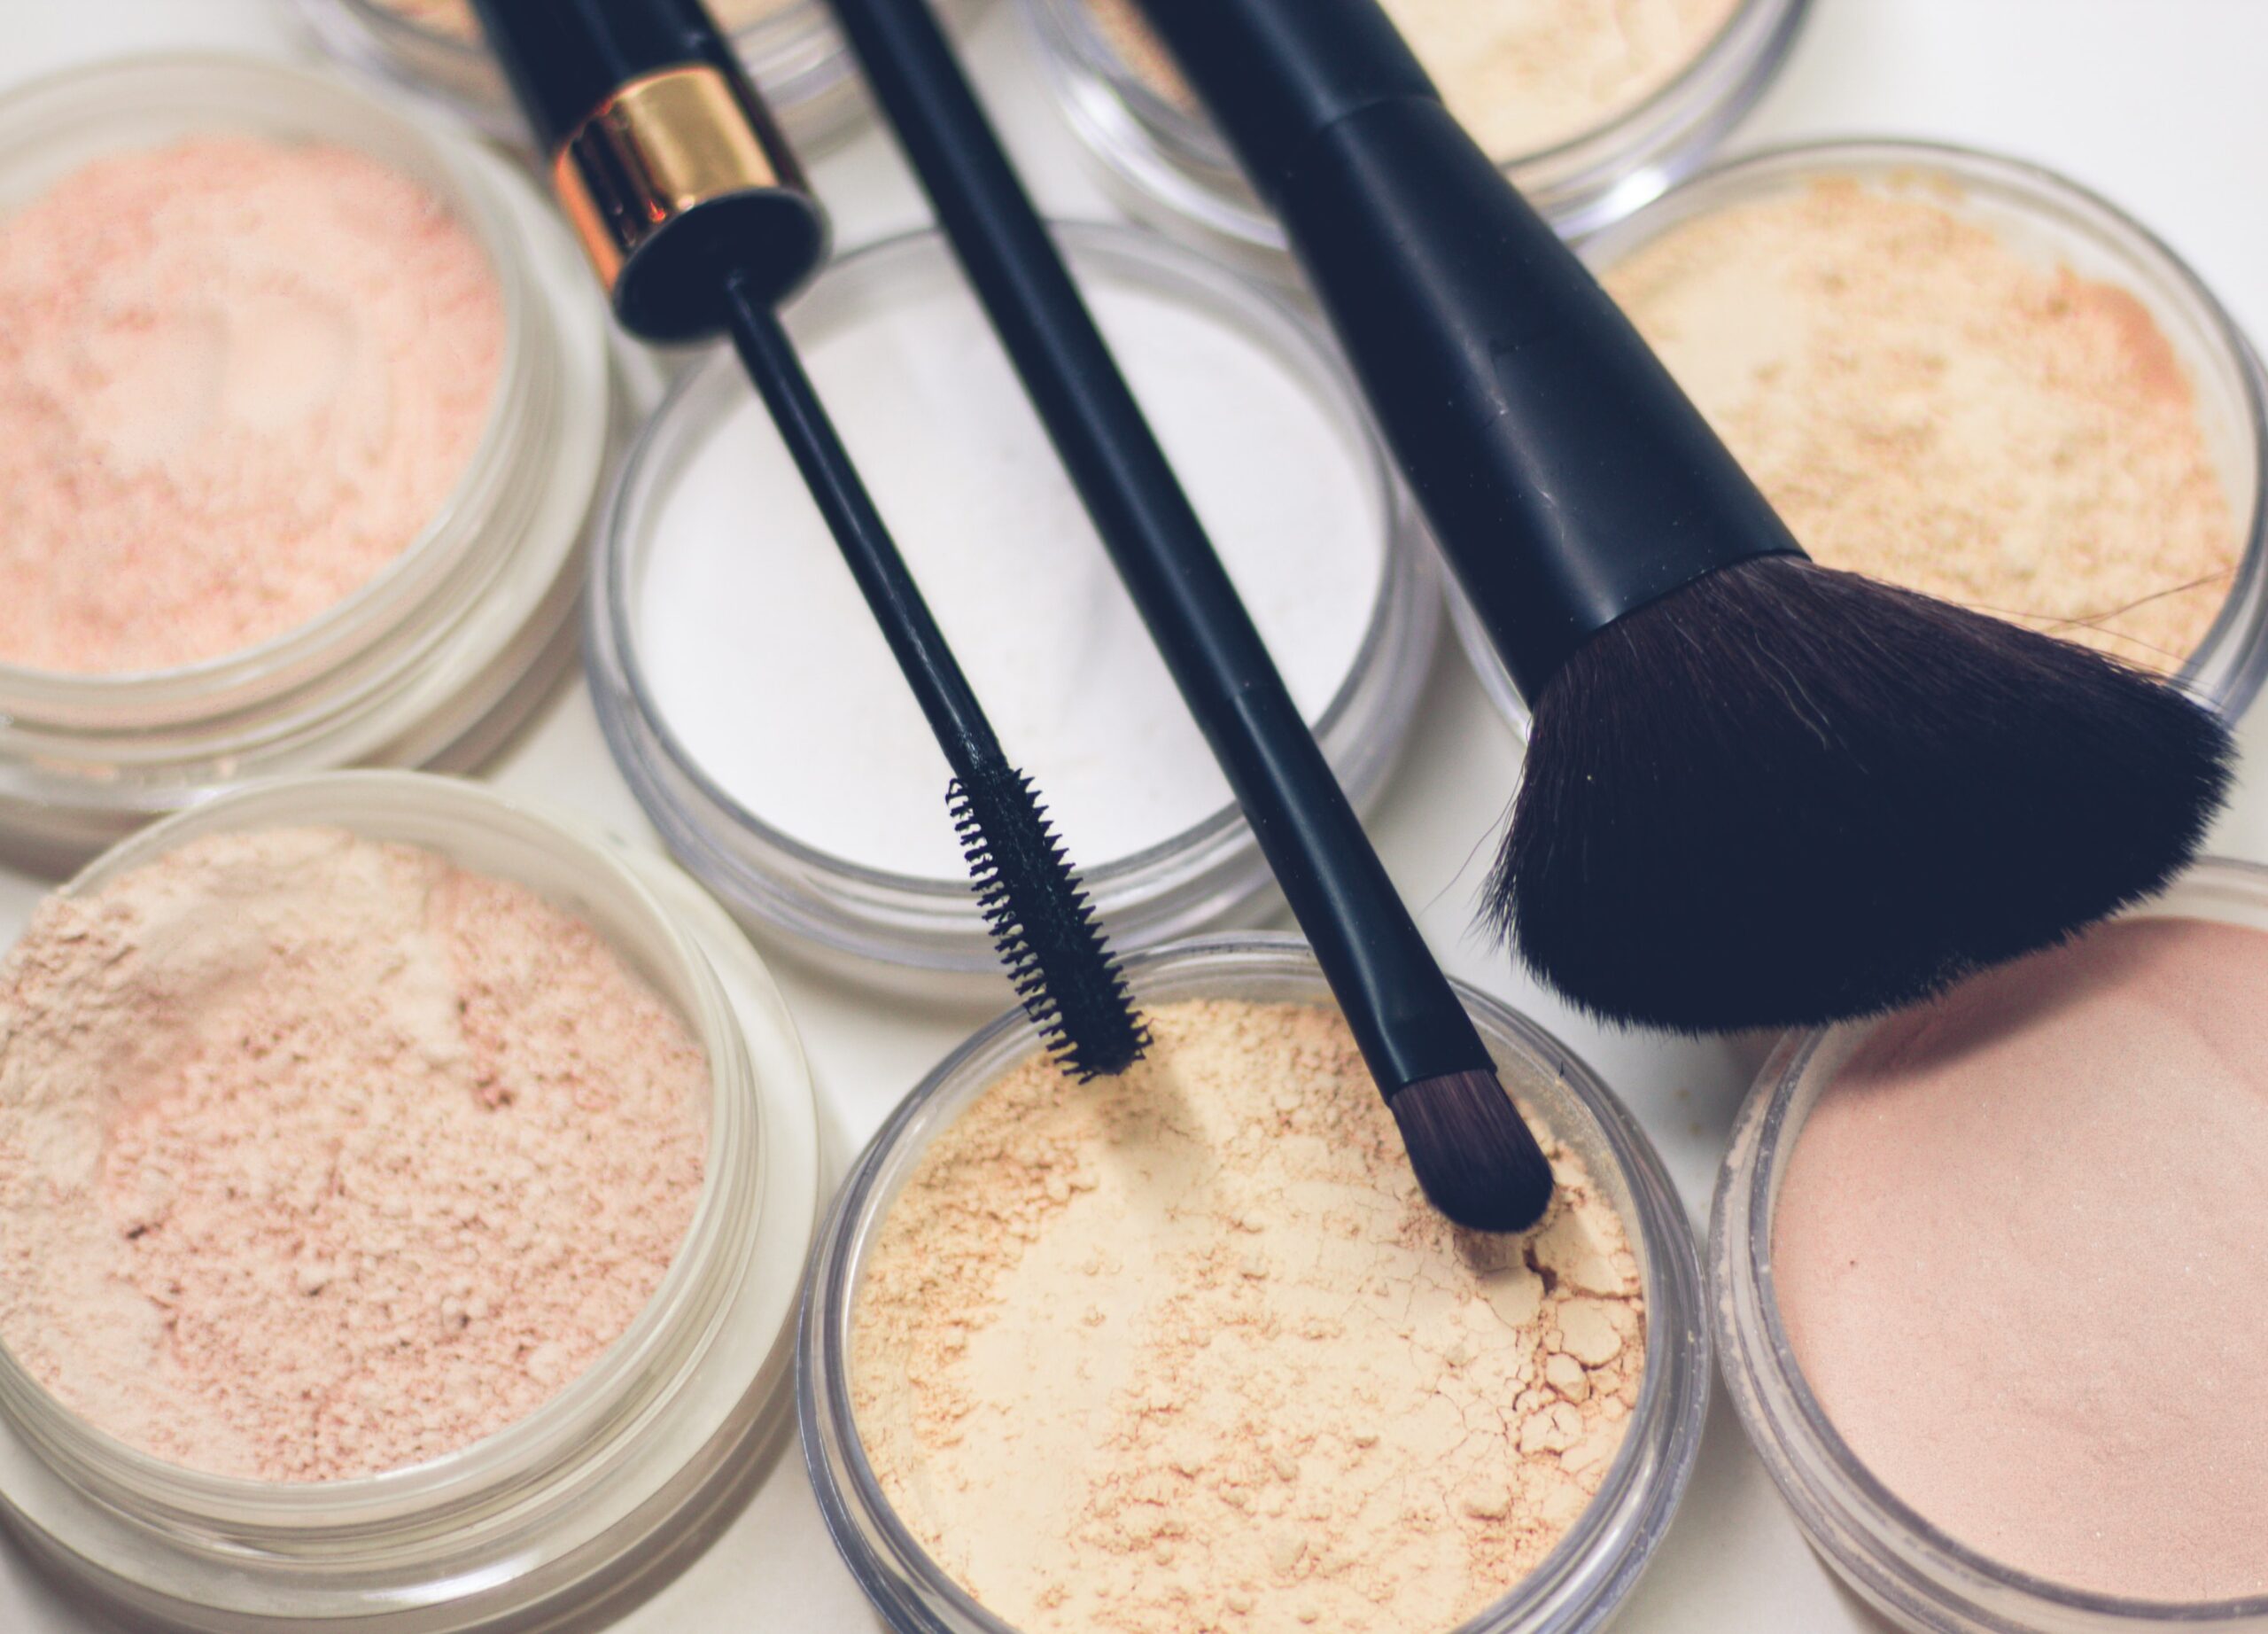 21 Best Natural Makeup Brands For Clean, Healthy Beauty